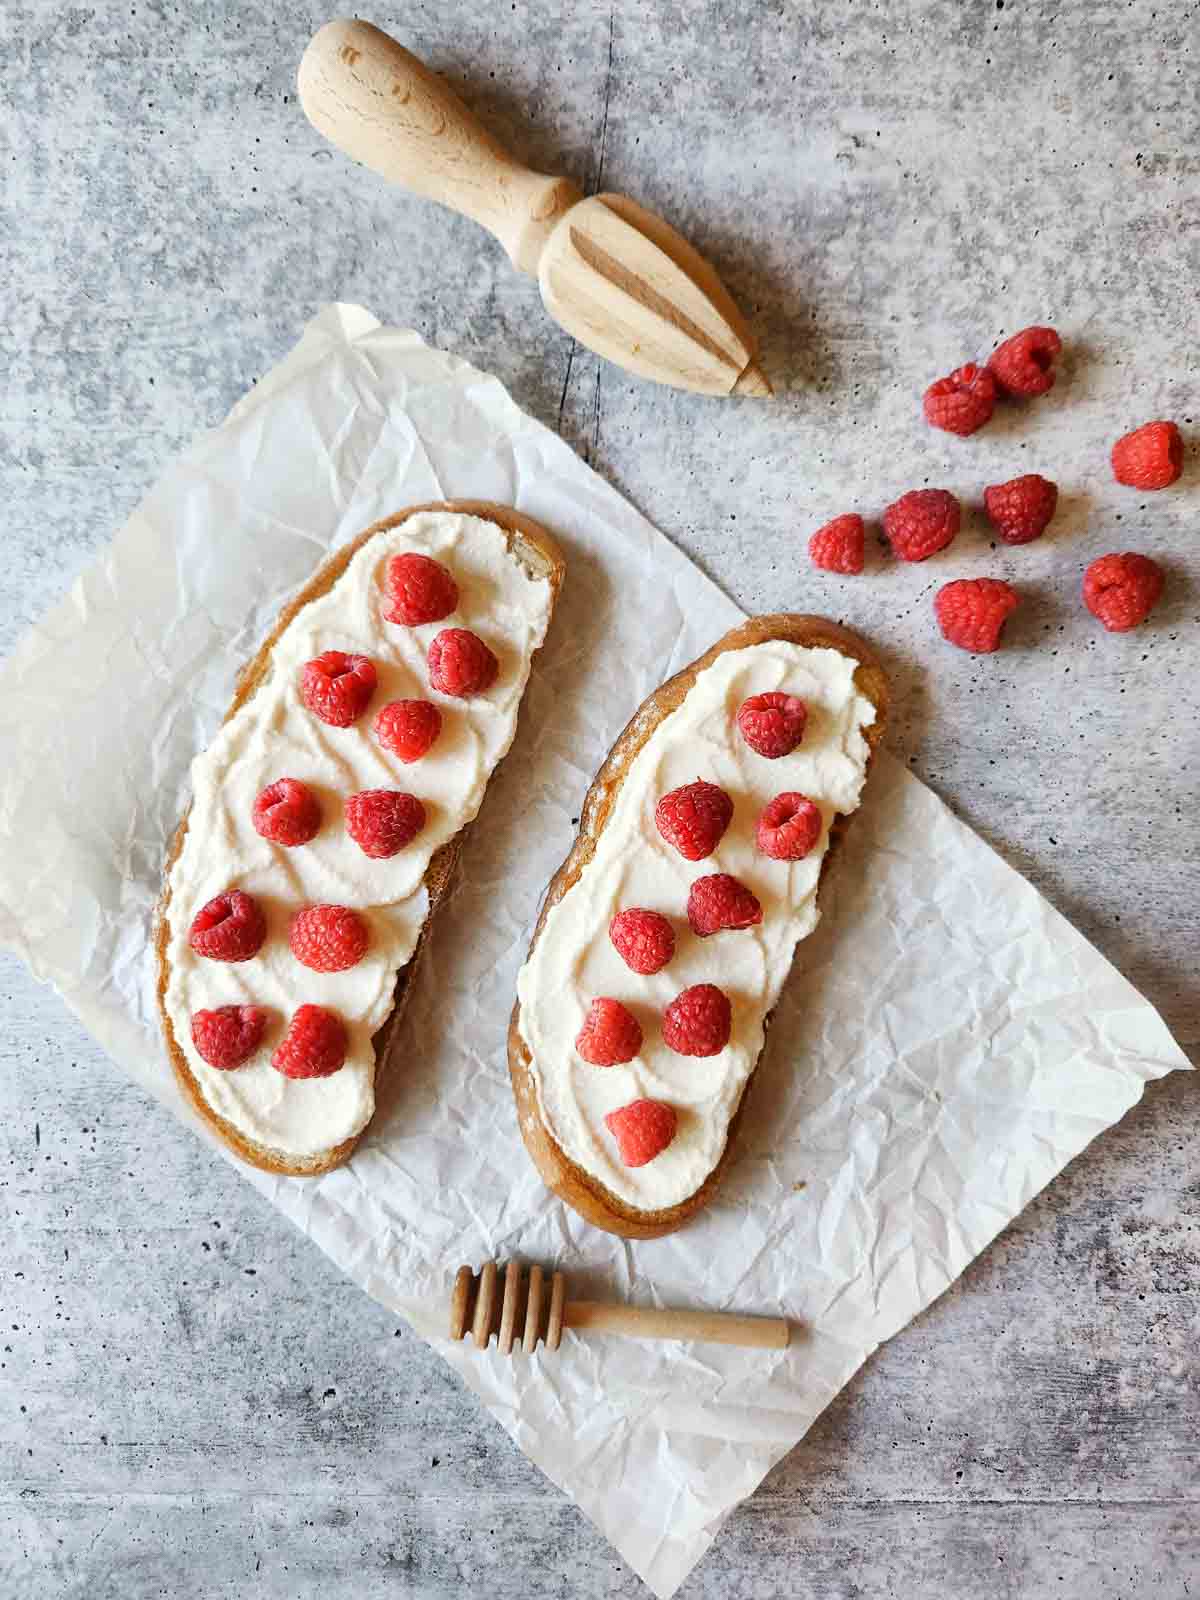 Two slices of toast with ricotta, and raspberries on white parchment paper.